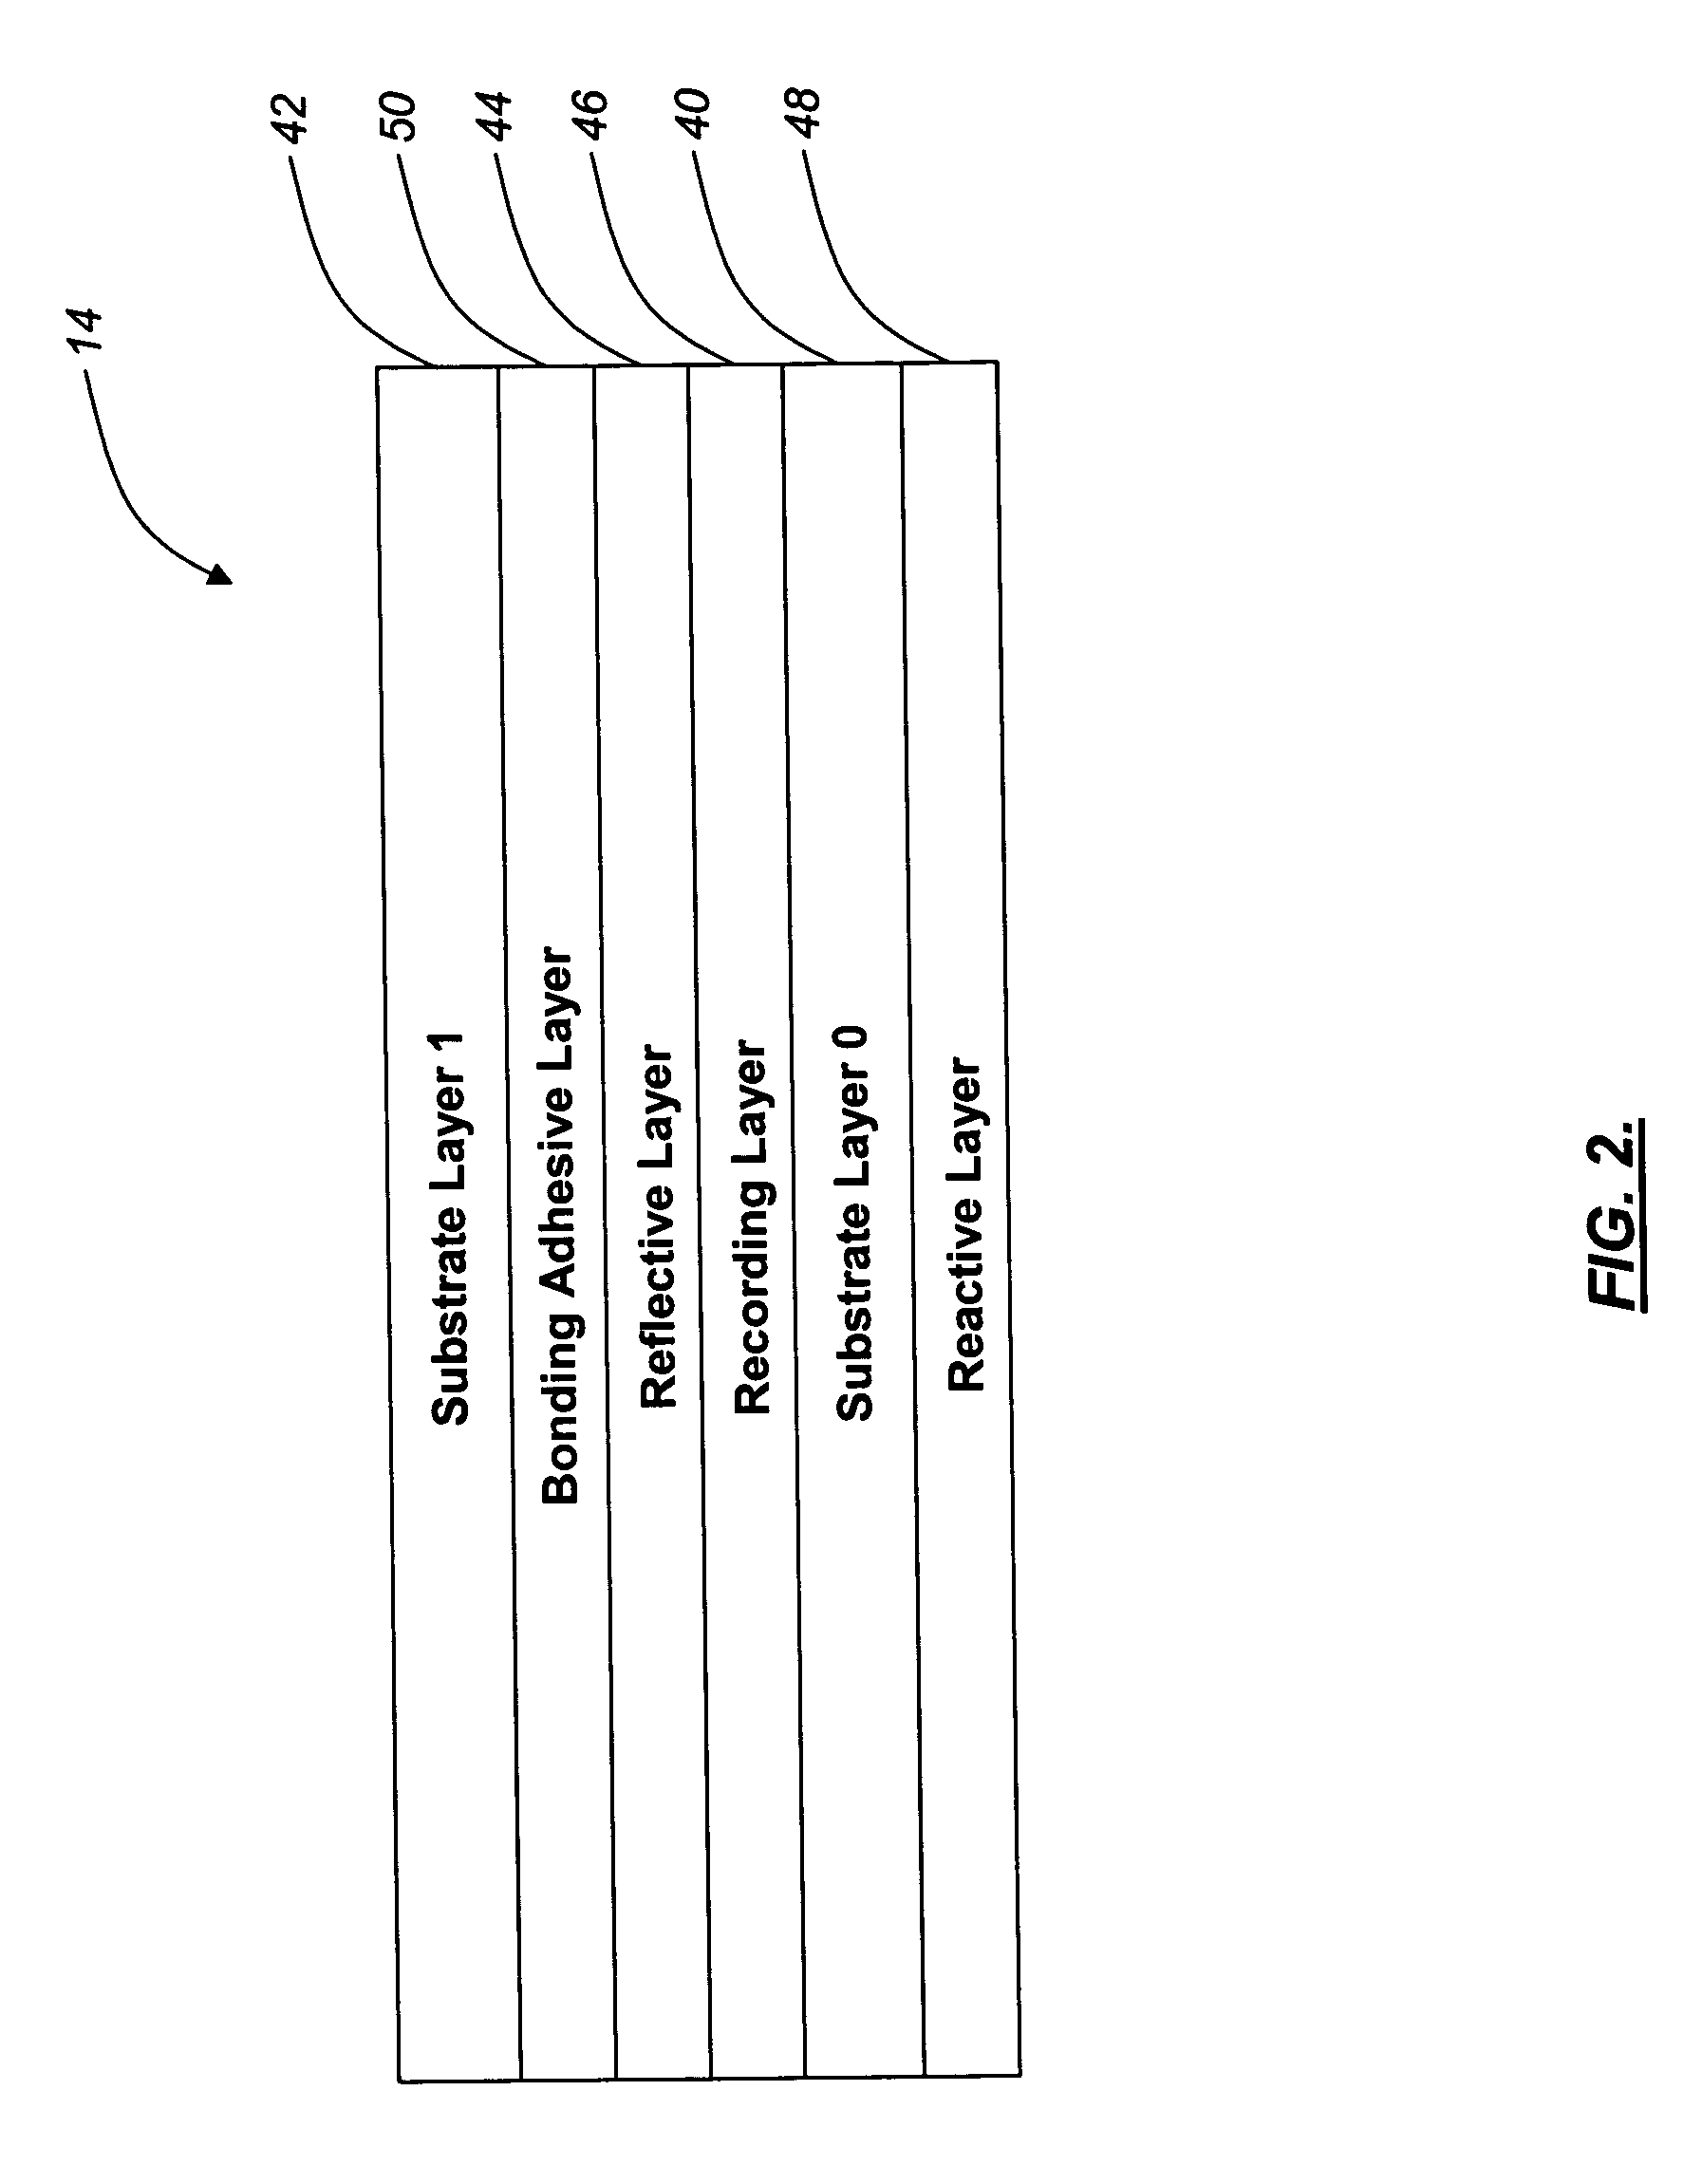 Limited-play recordable data storage media and associated methods of manufacture